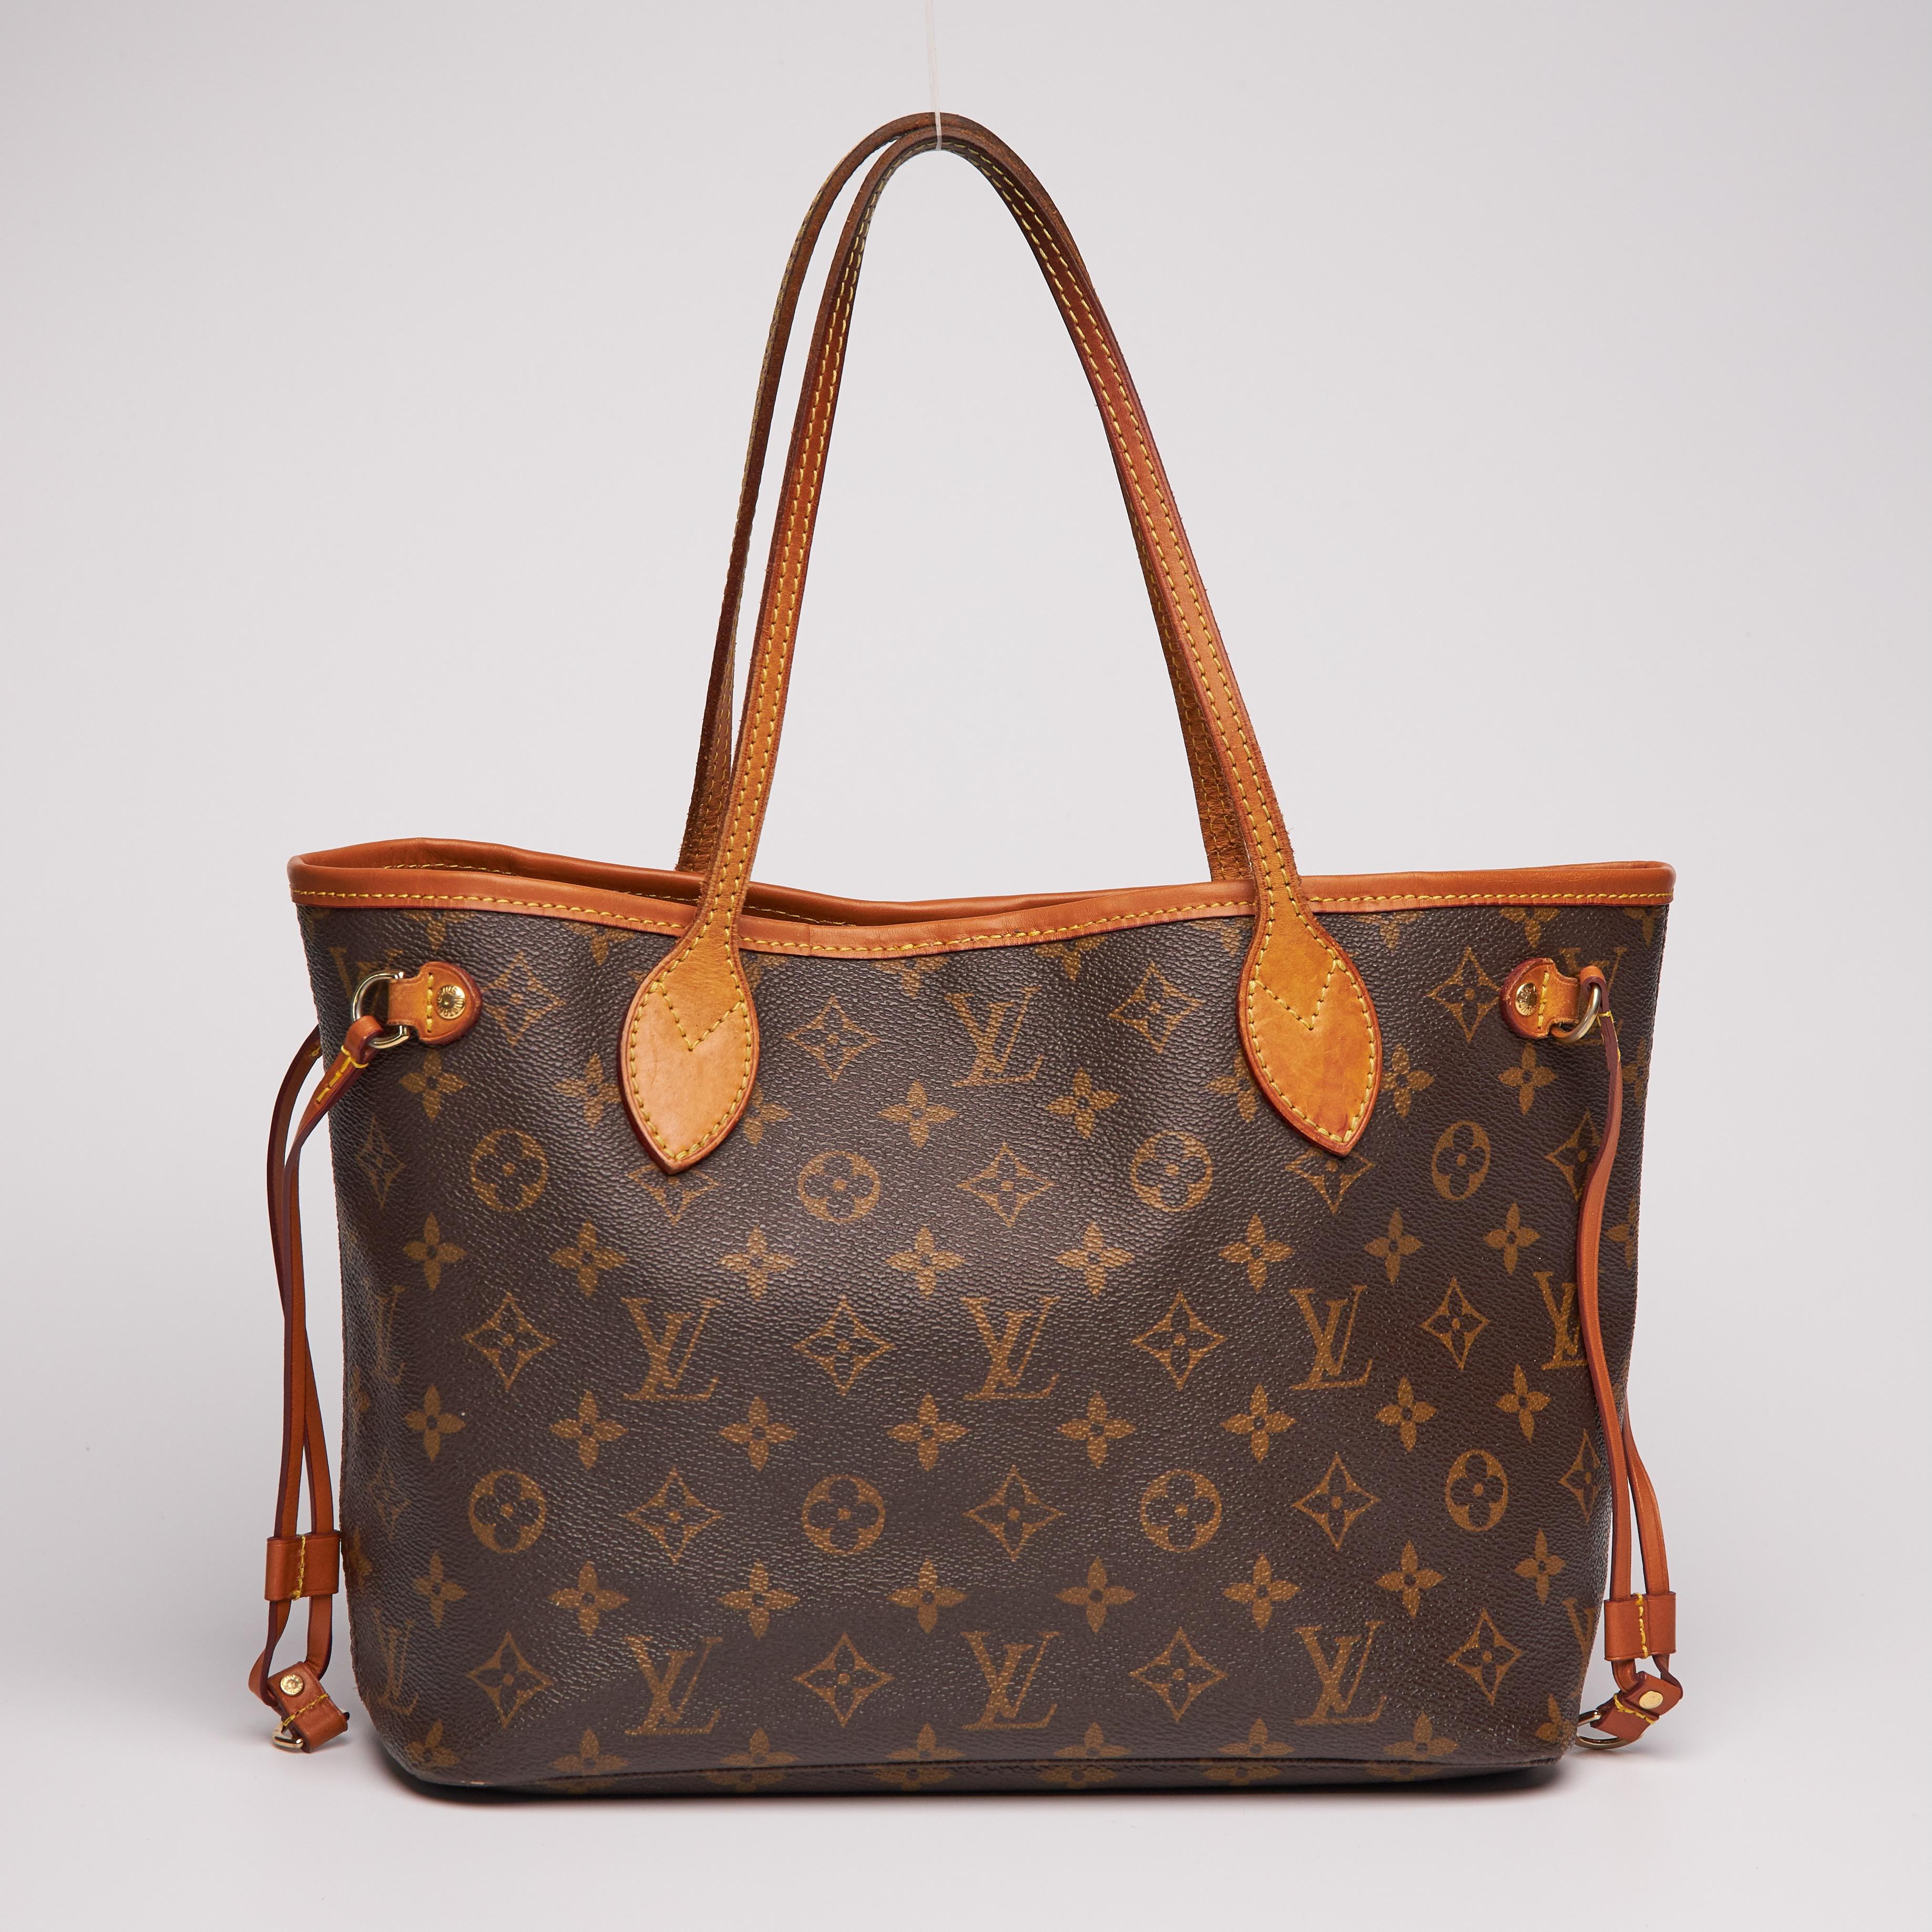 
This stylish, smaller sized tote is made of classic Louis Vuitton monogram coated canvas. The tote features vachetta cowhide leather strap handles, trim, and side cinch cords with polished brass hardware. The wide top opens to a beige striped